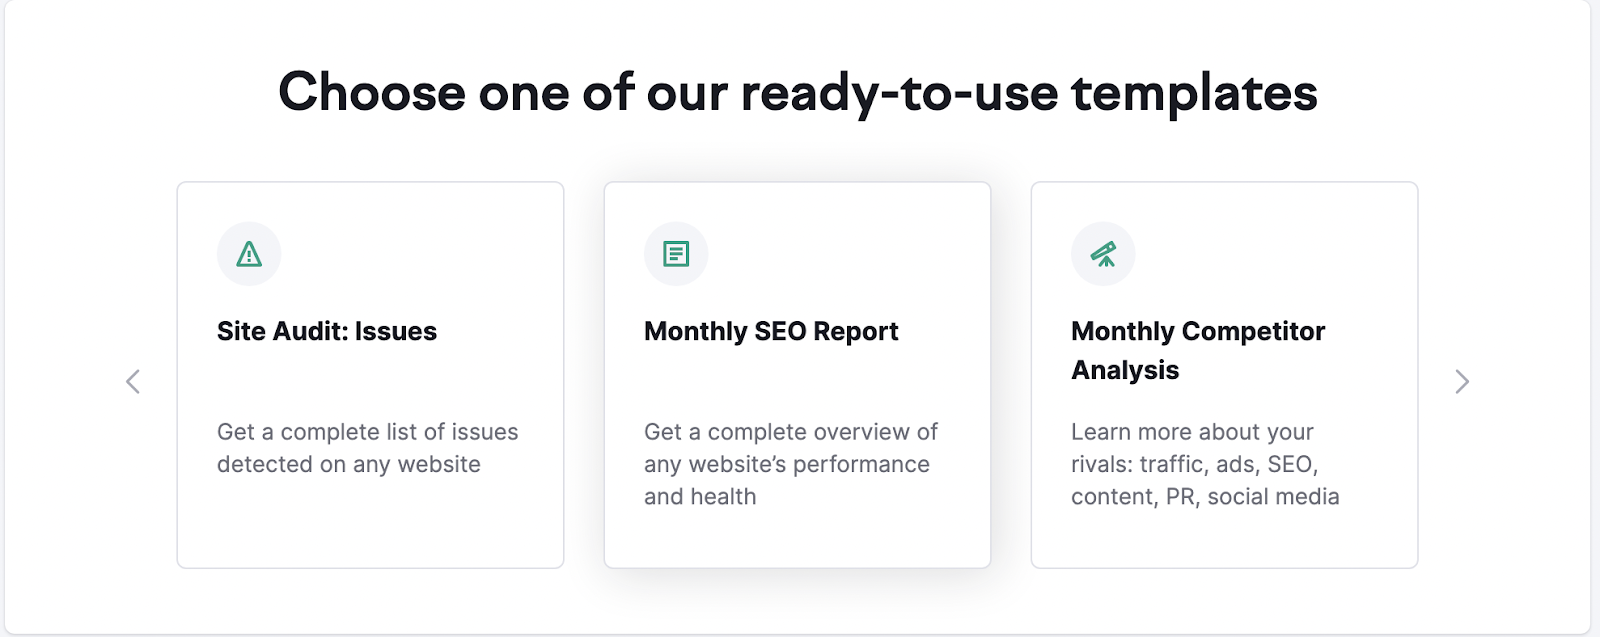 My Reports tool helps you build your reports from many ready-to-use templates